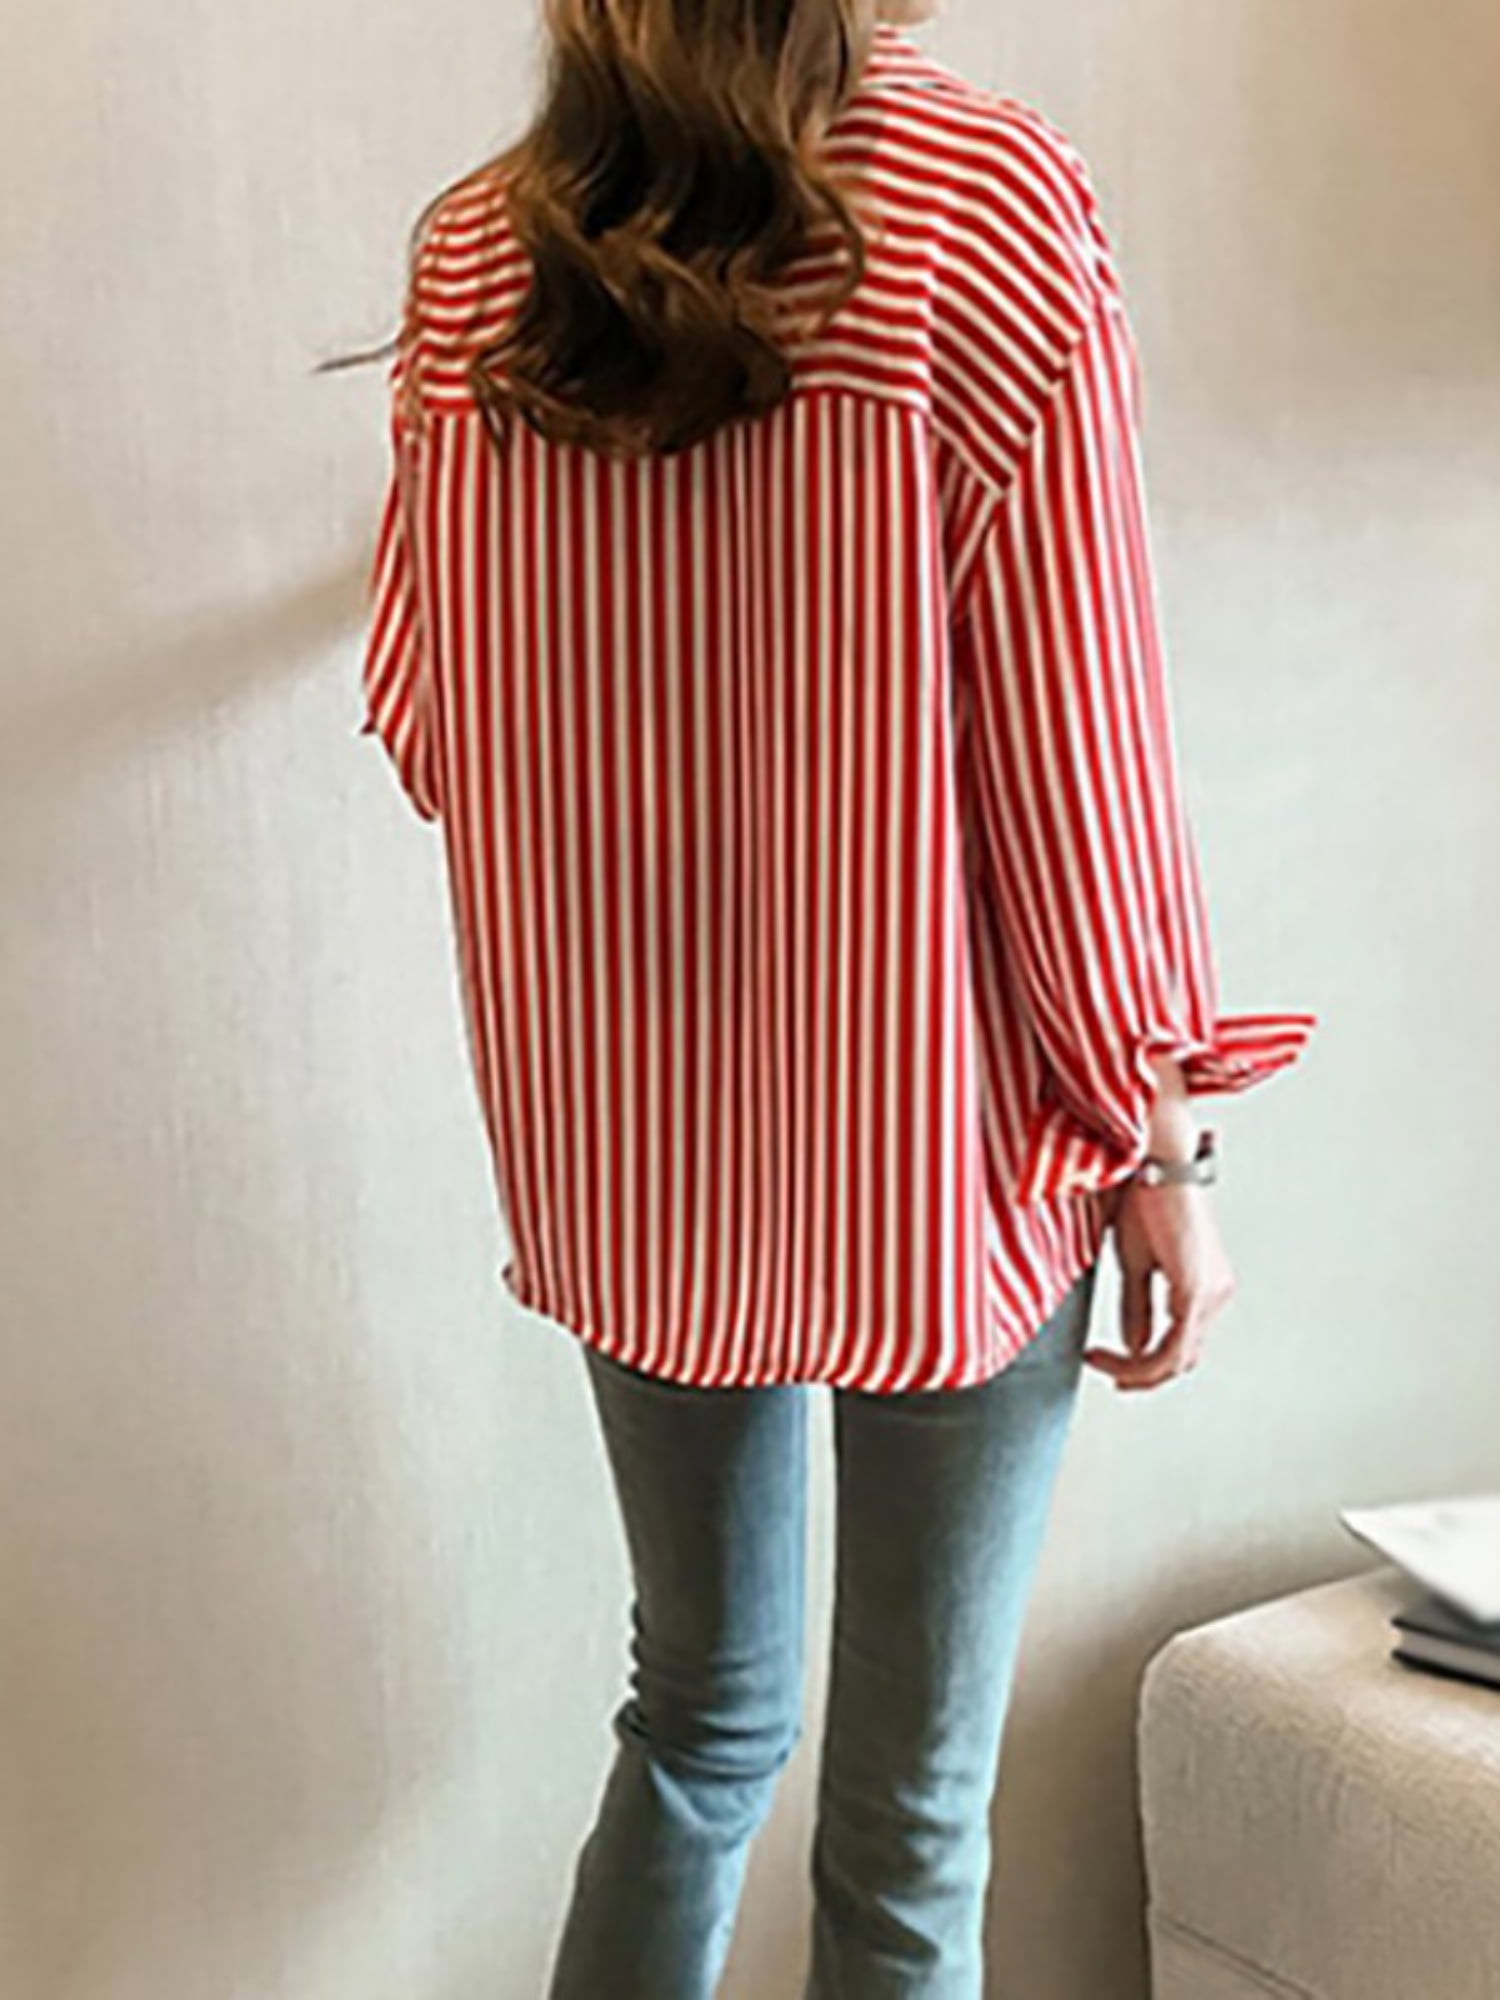 Zupora Women's T Shirt Loose Fit Striped Print Long Roll Sleeves